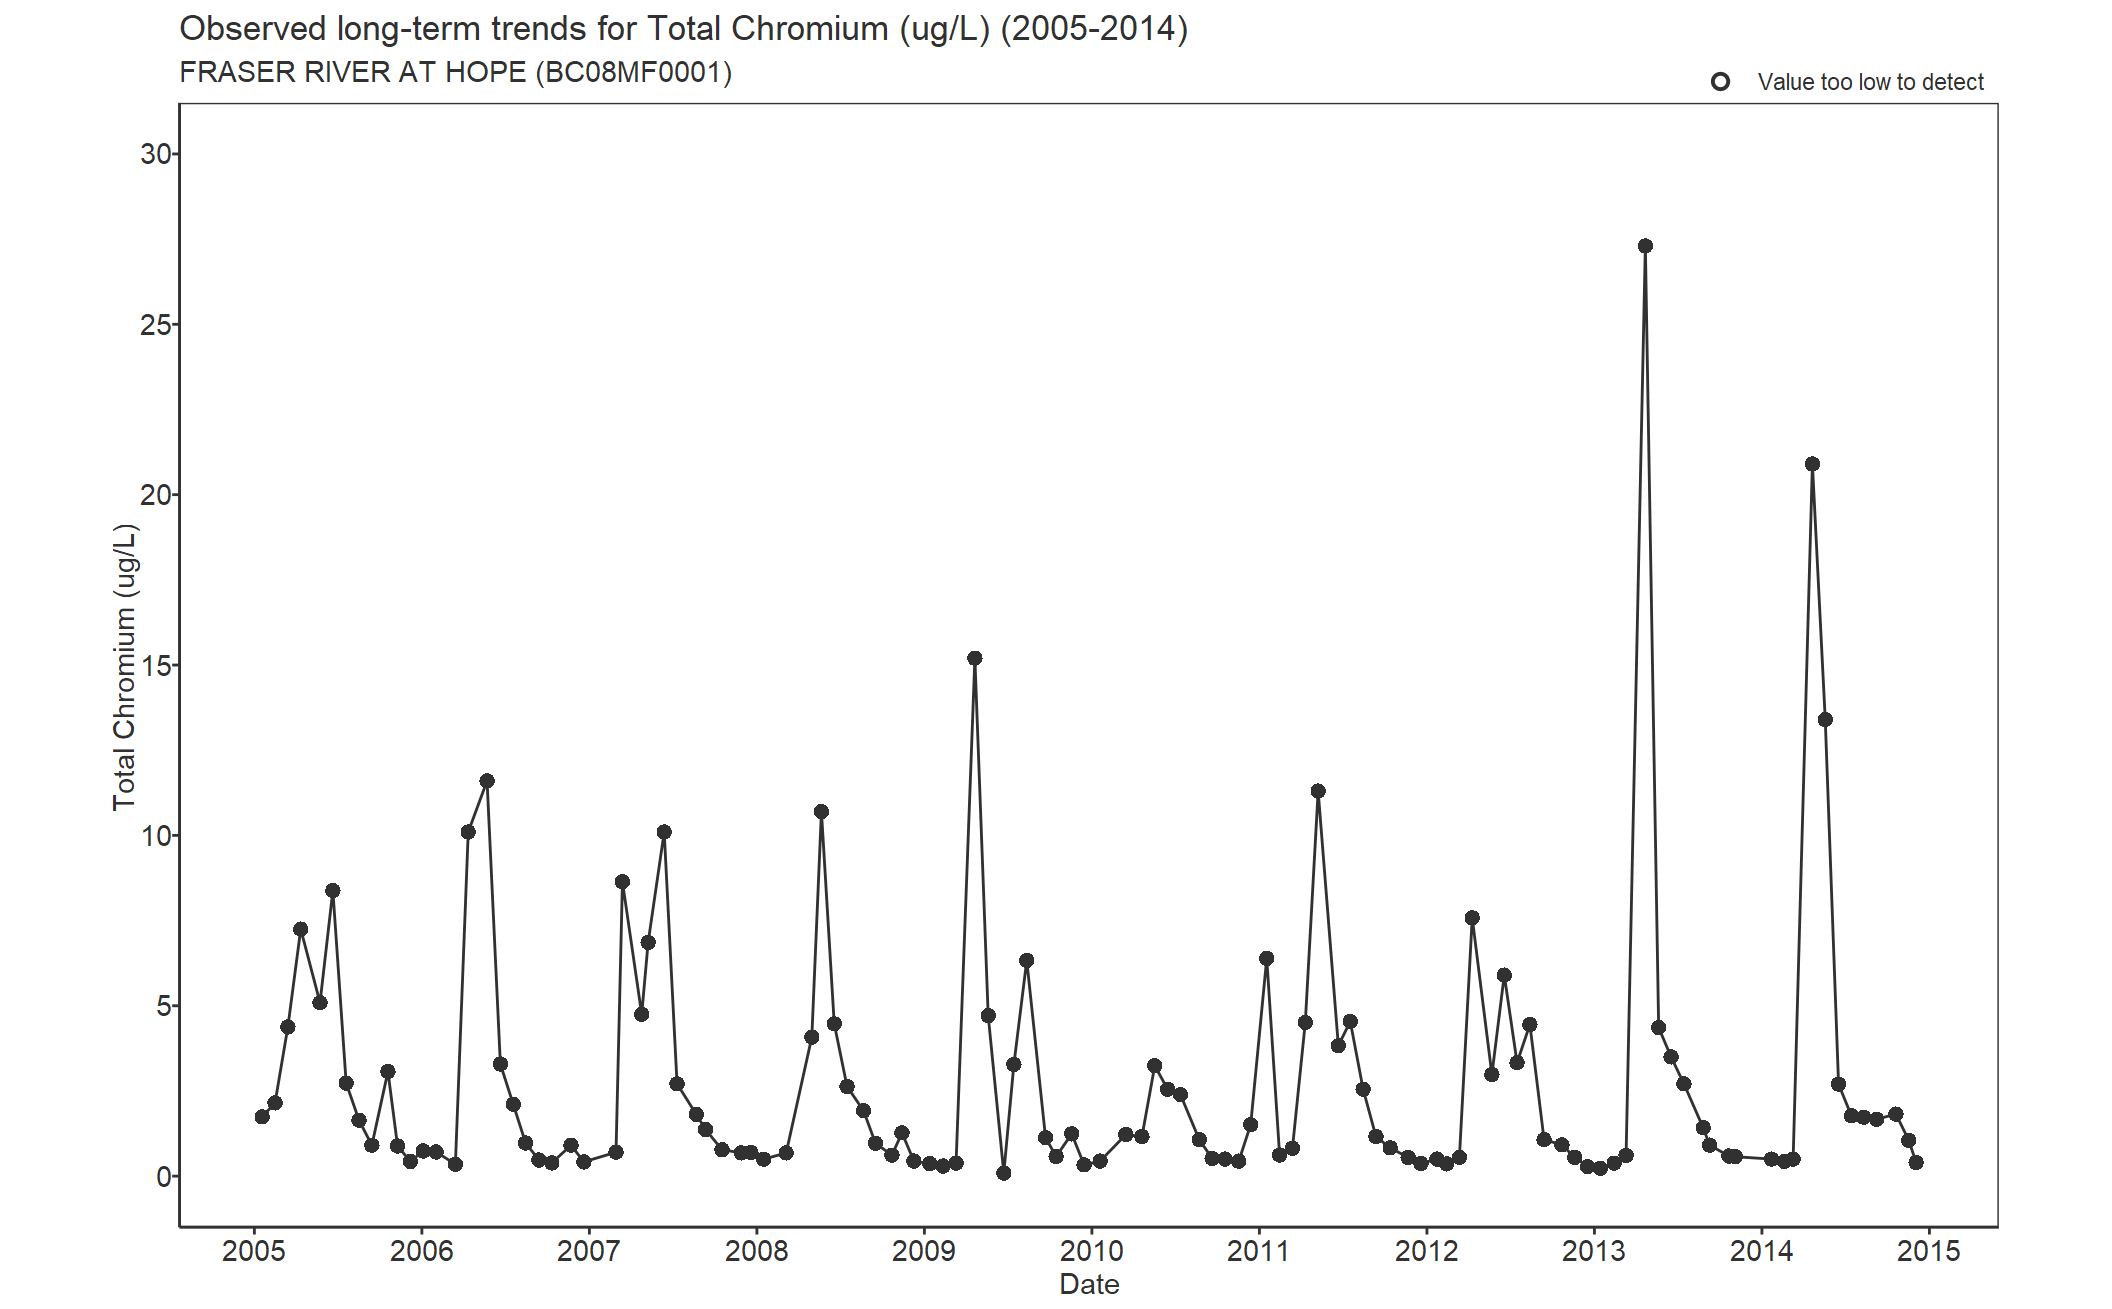 Observed long-term trends for Chromium Total (2005-2014)